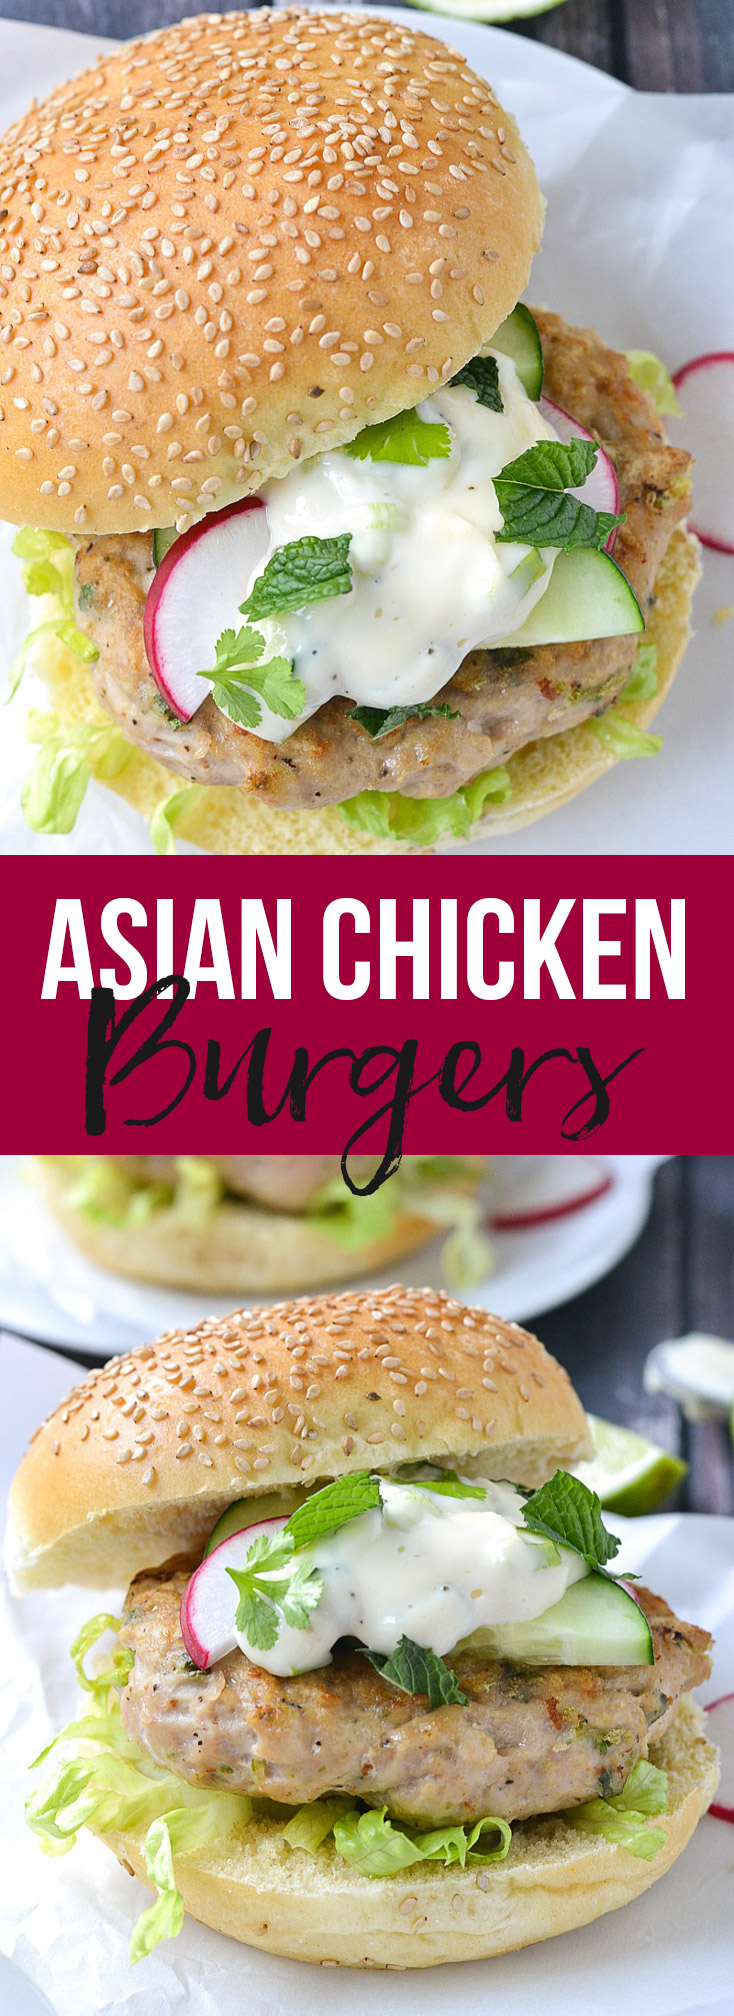 Asian Chicken Burgers | www.motherthyme.com